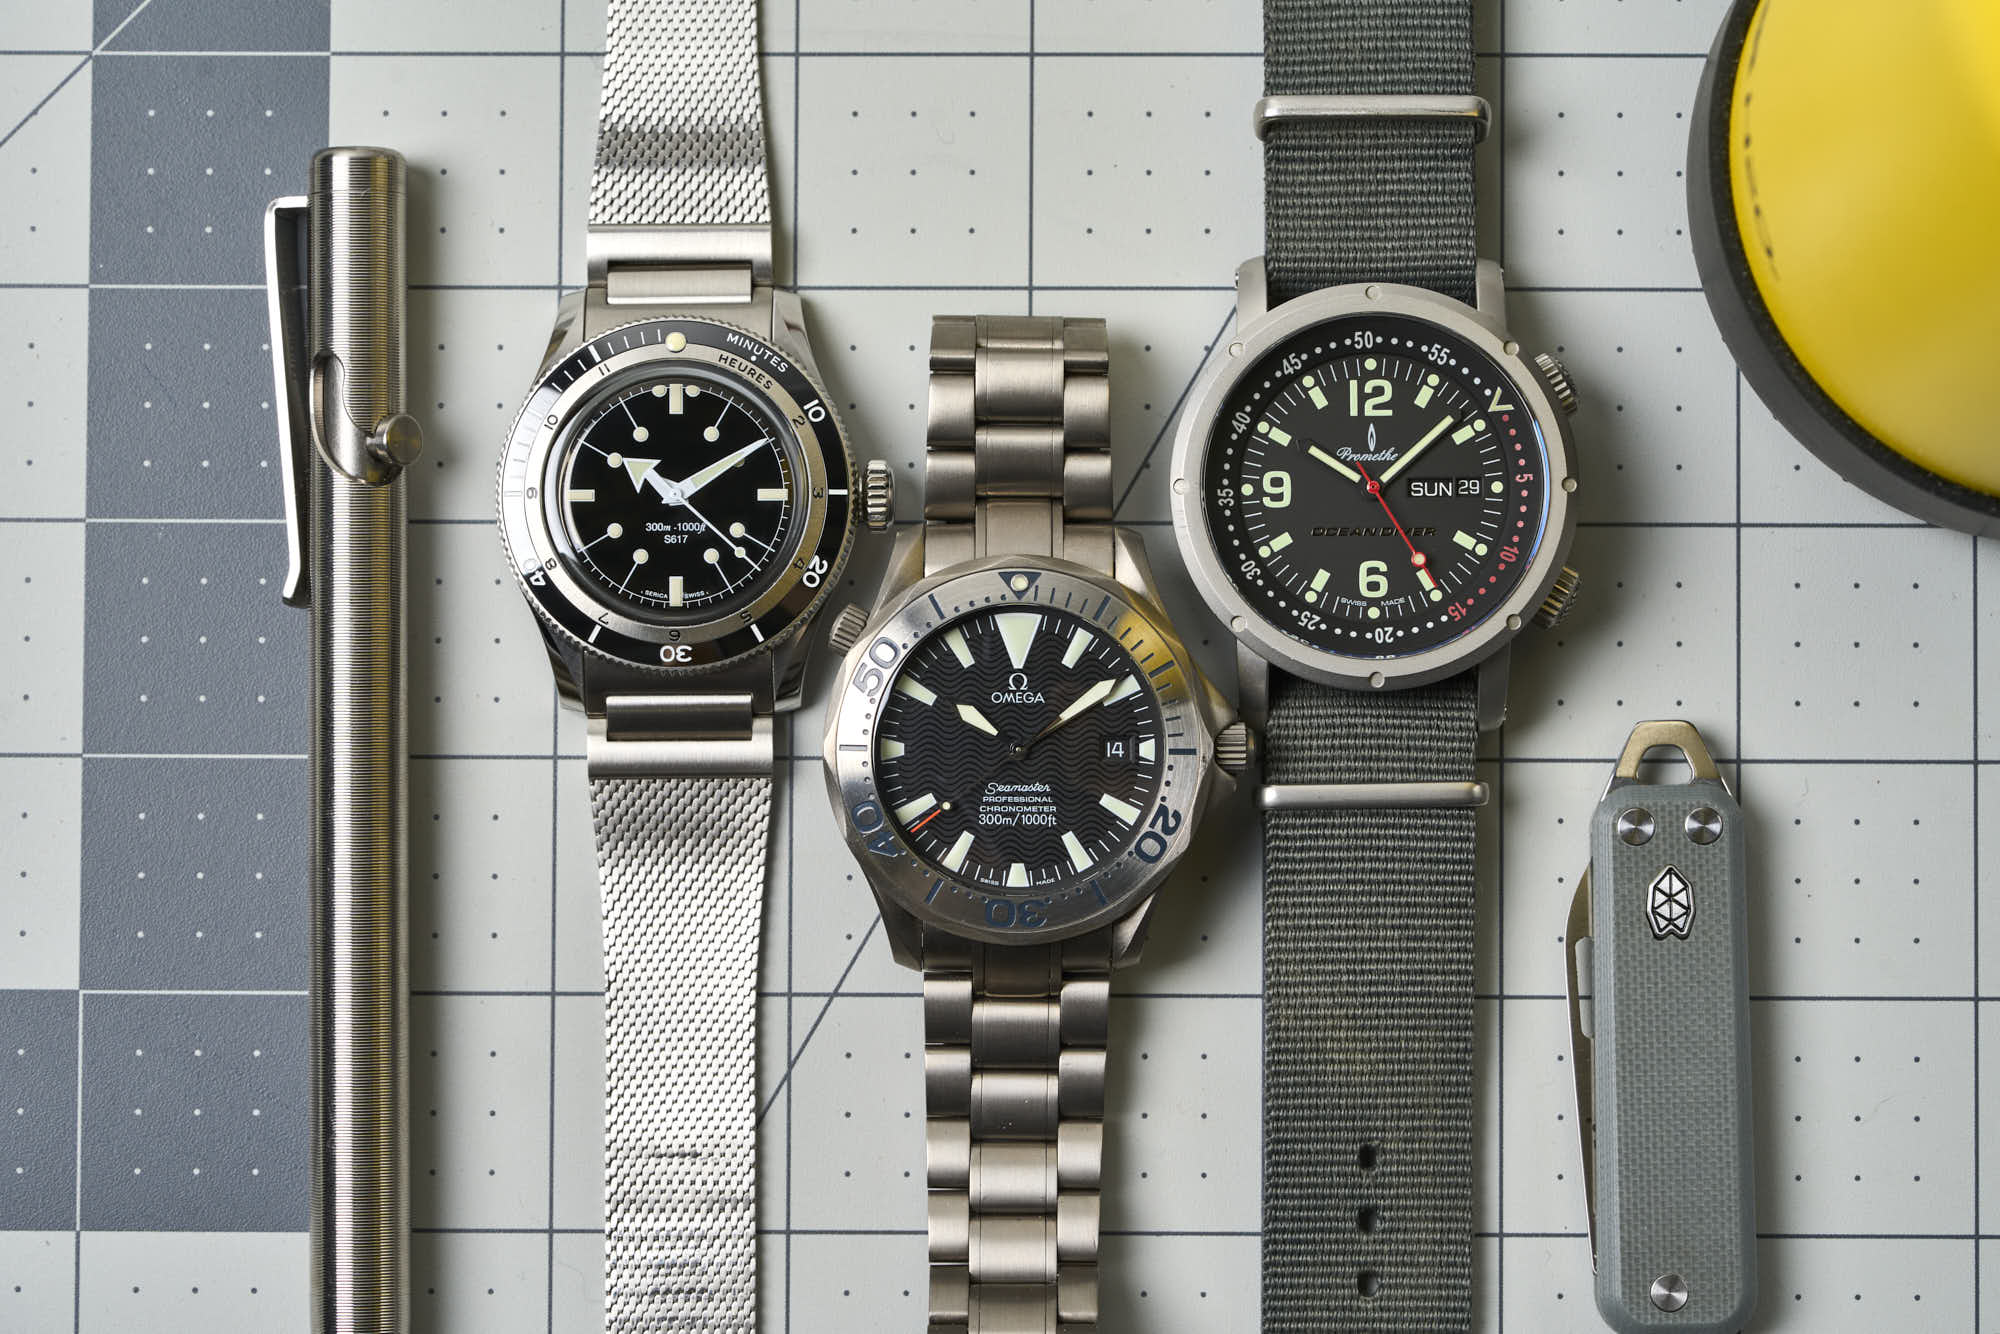 [VIDEO] Inside the Collection: Divers That Break From Convention - Worn ...